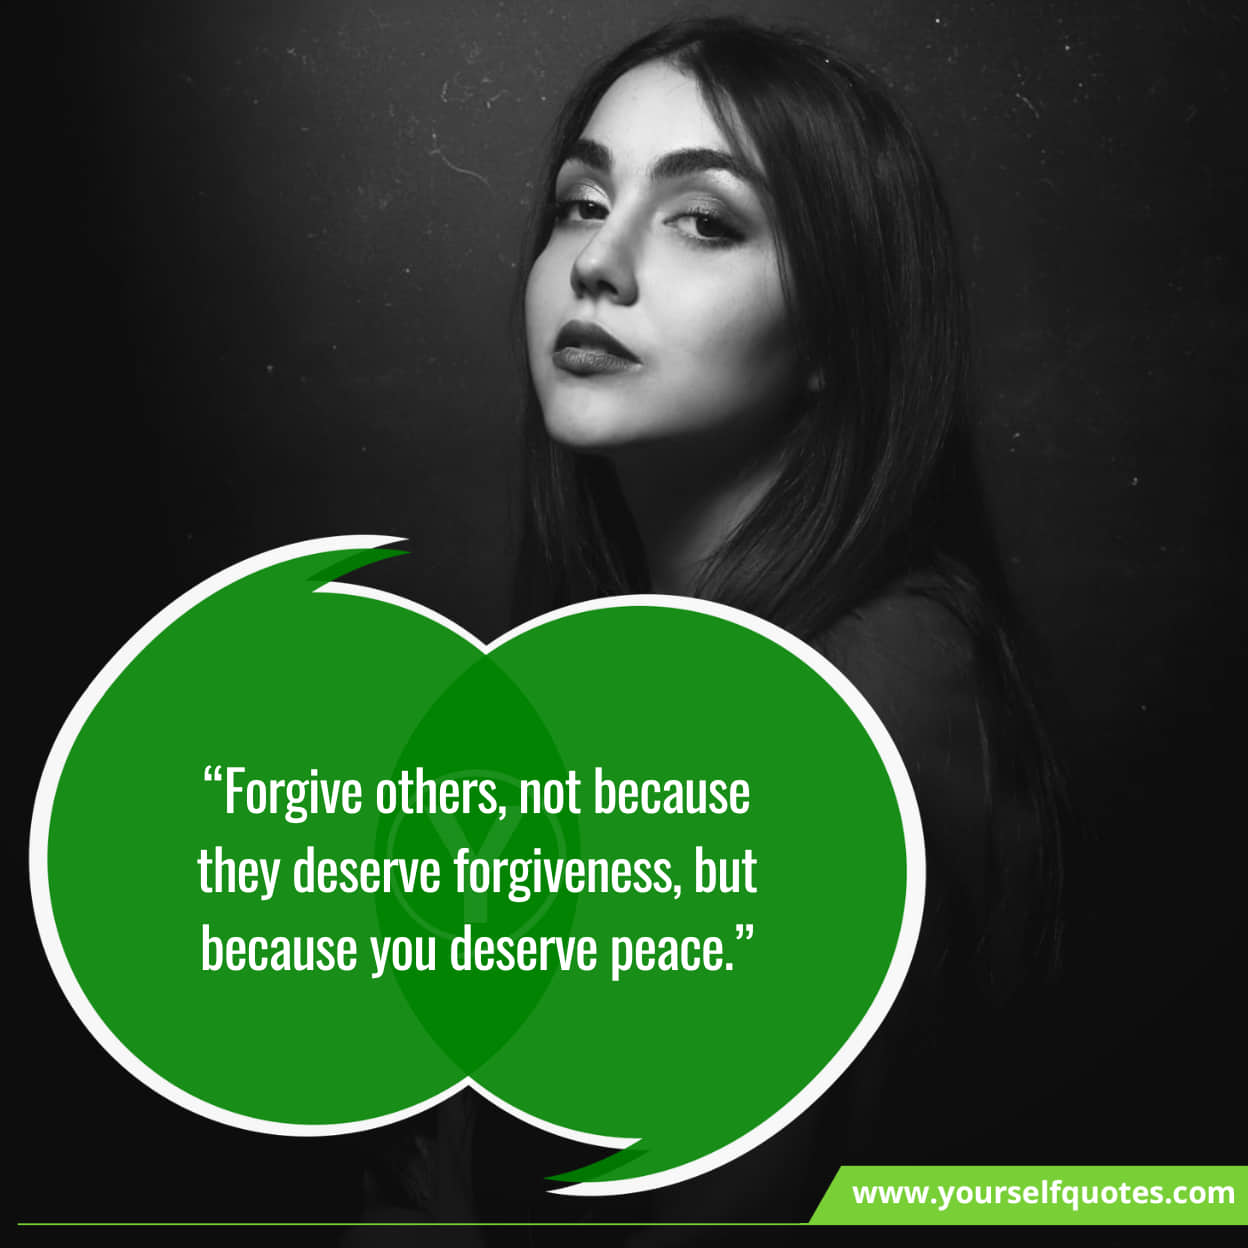 Best Famous Quotes About Forgiveness